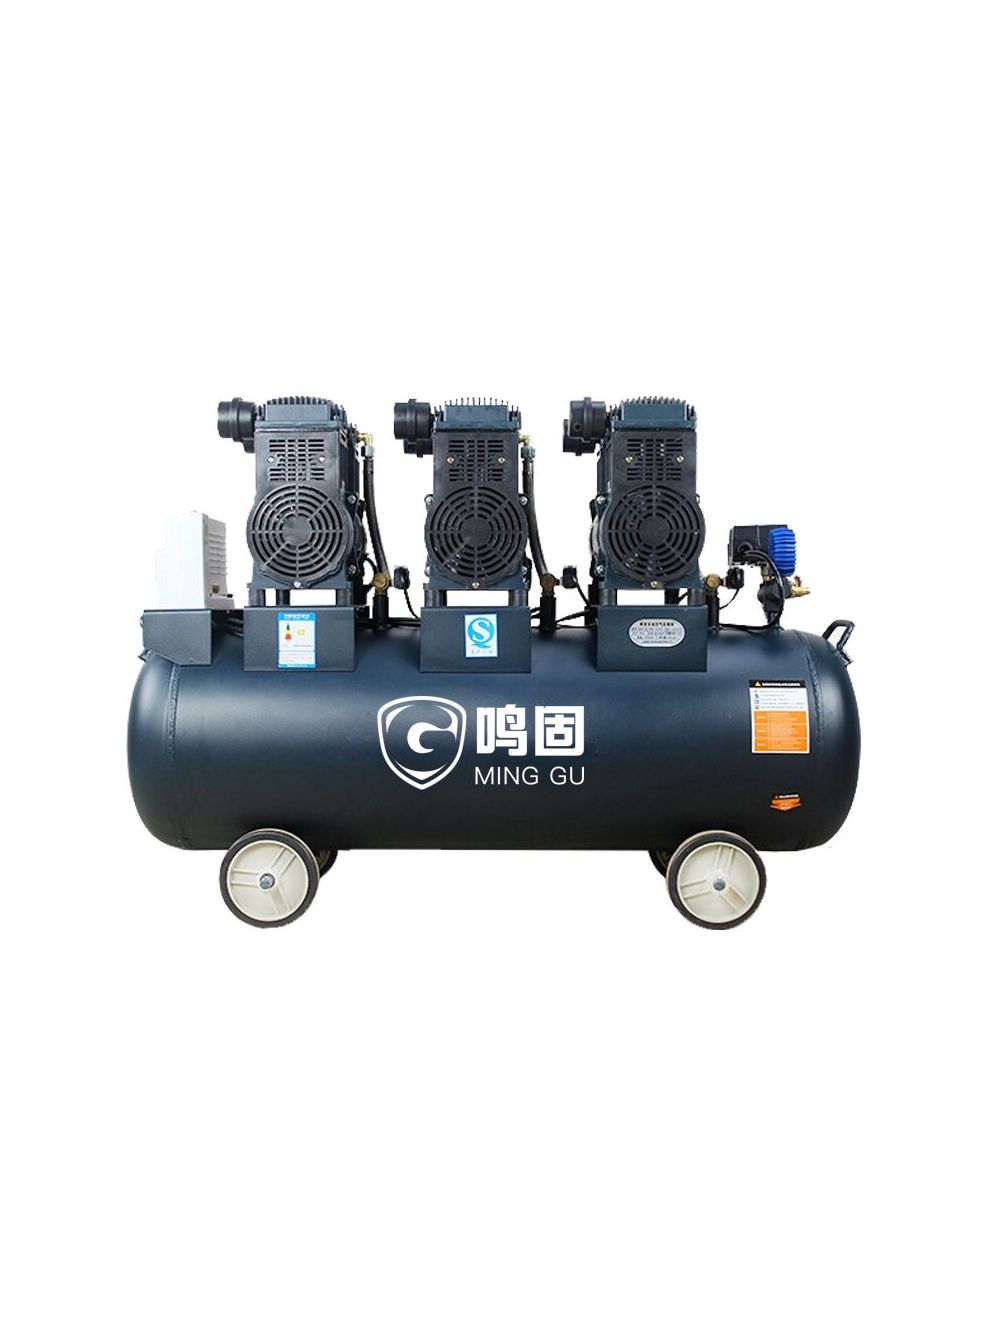 New In stock for sale, MING GU Air Compressor 850WX3-70L